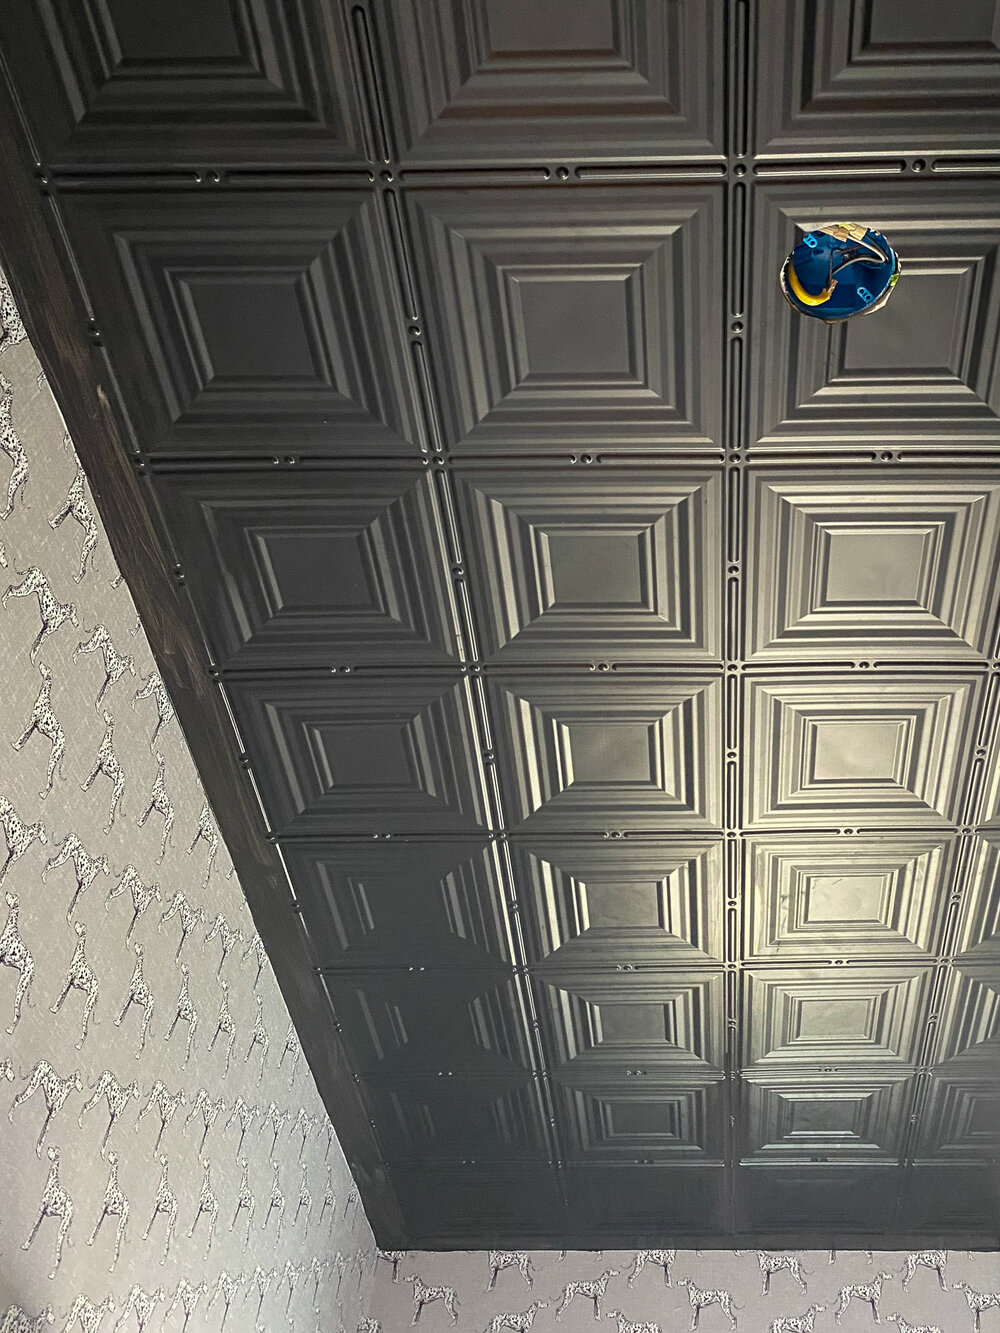 Installing Tin Ceiling Tiles In An Old, Tin Tile Ceiling Installation